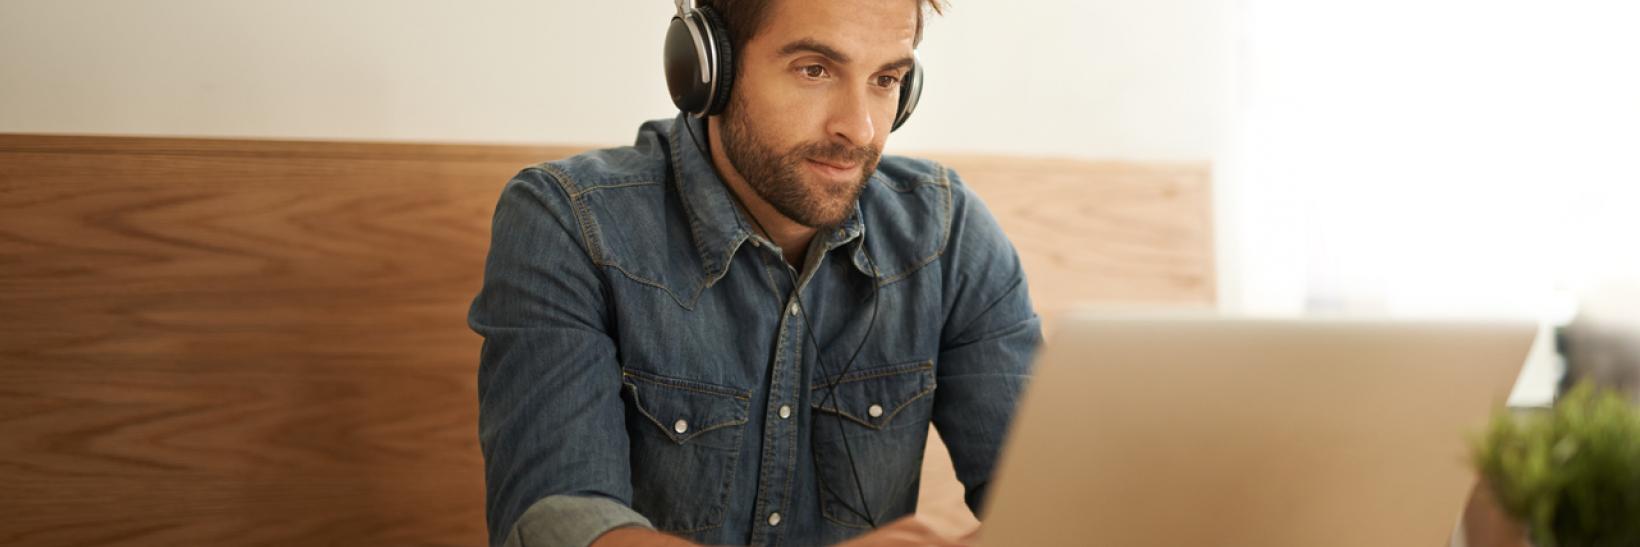 A man working on his computer and wearing headphones.